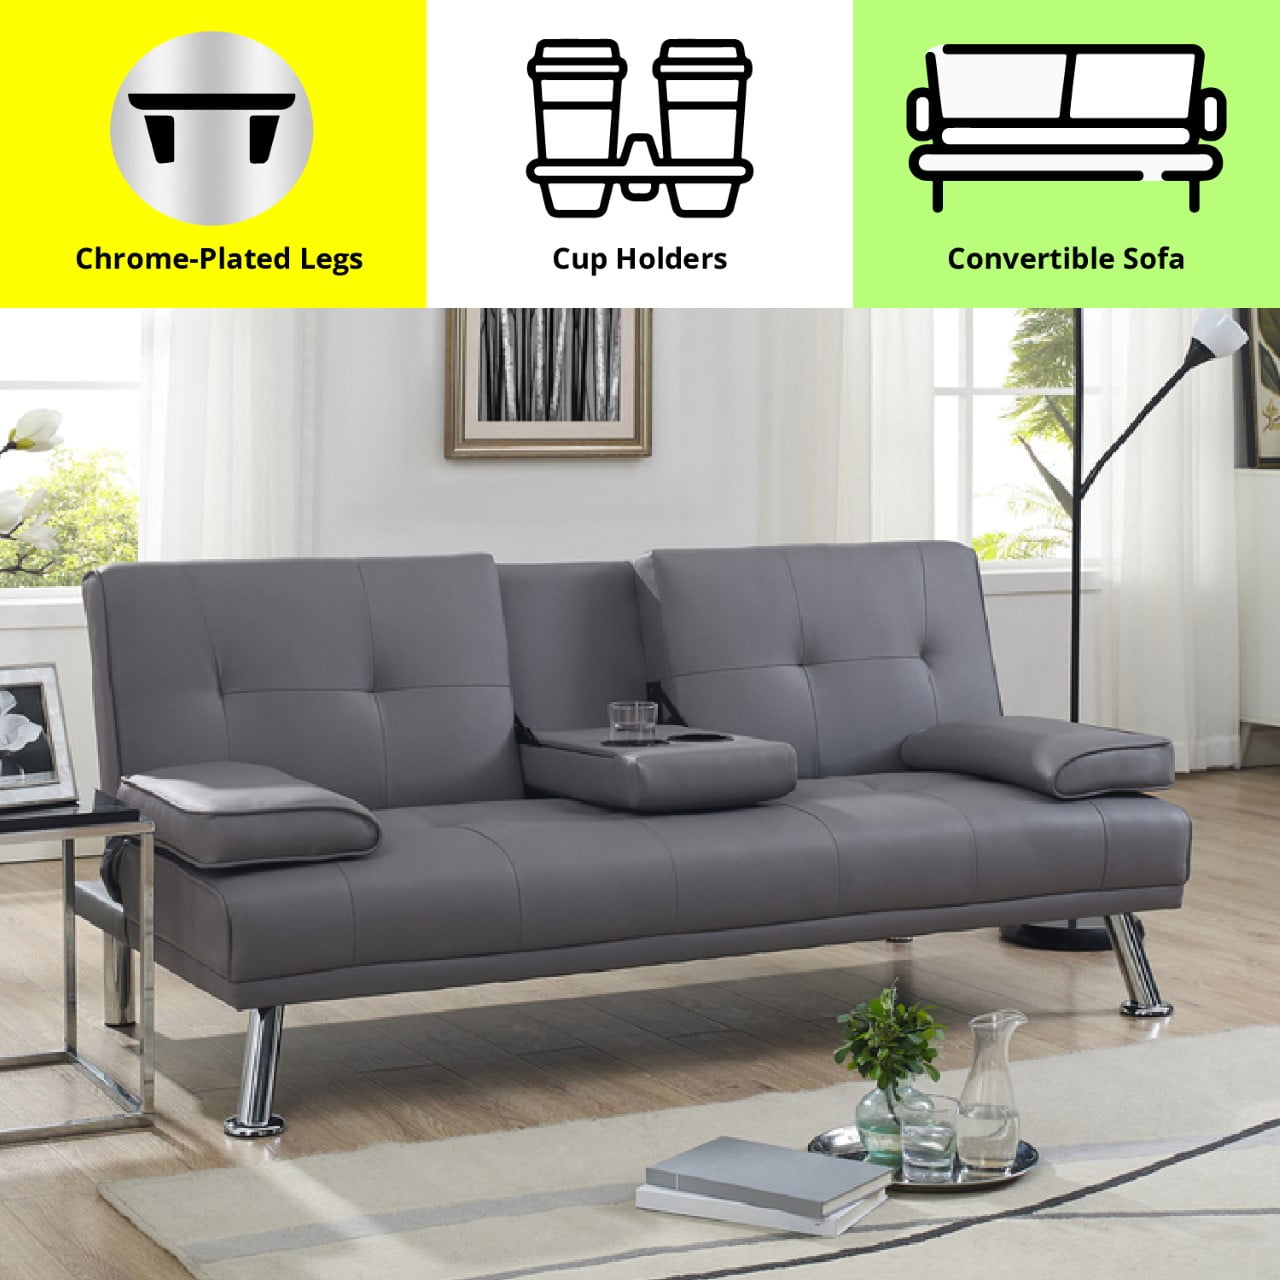 Gray Futon Couch W/ Microfiber Cover Home Office Sofa Bed Furniture Full Twin 